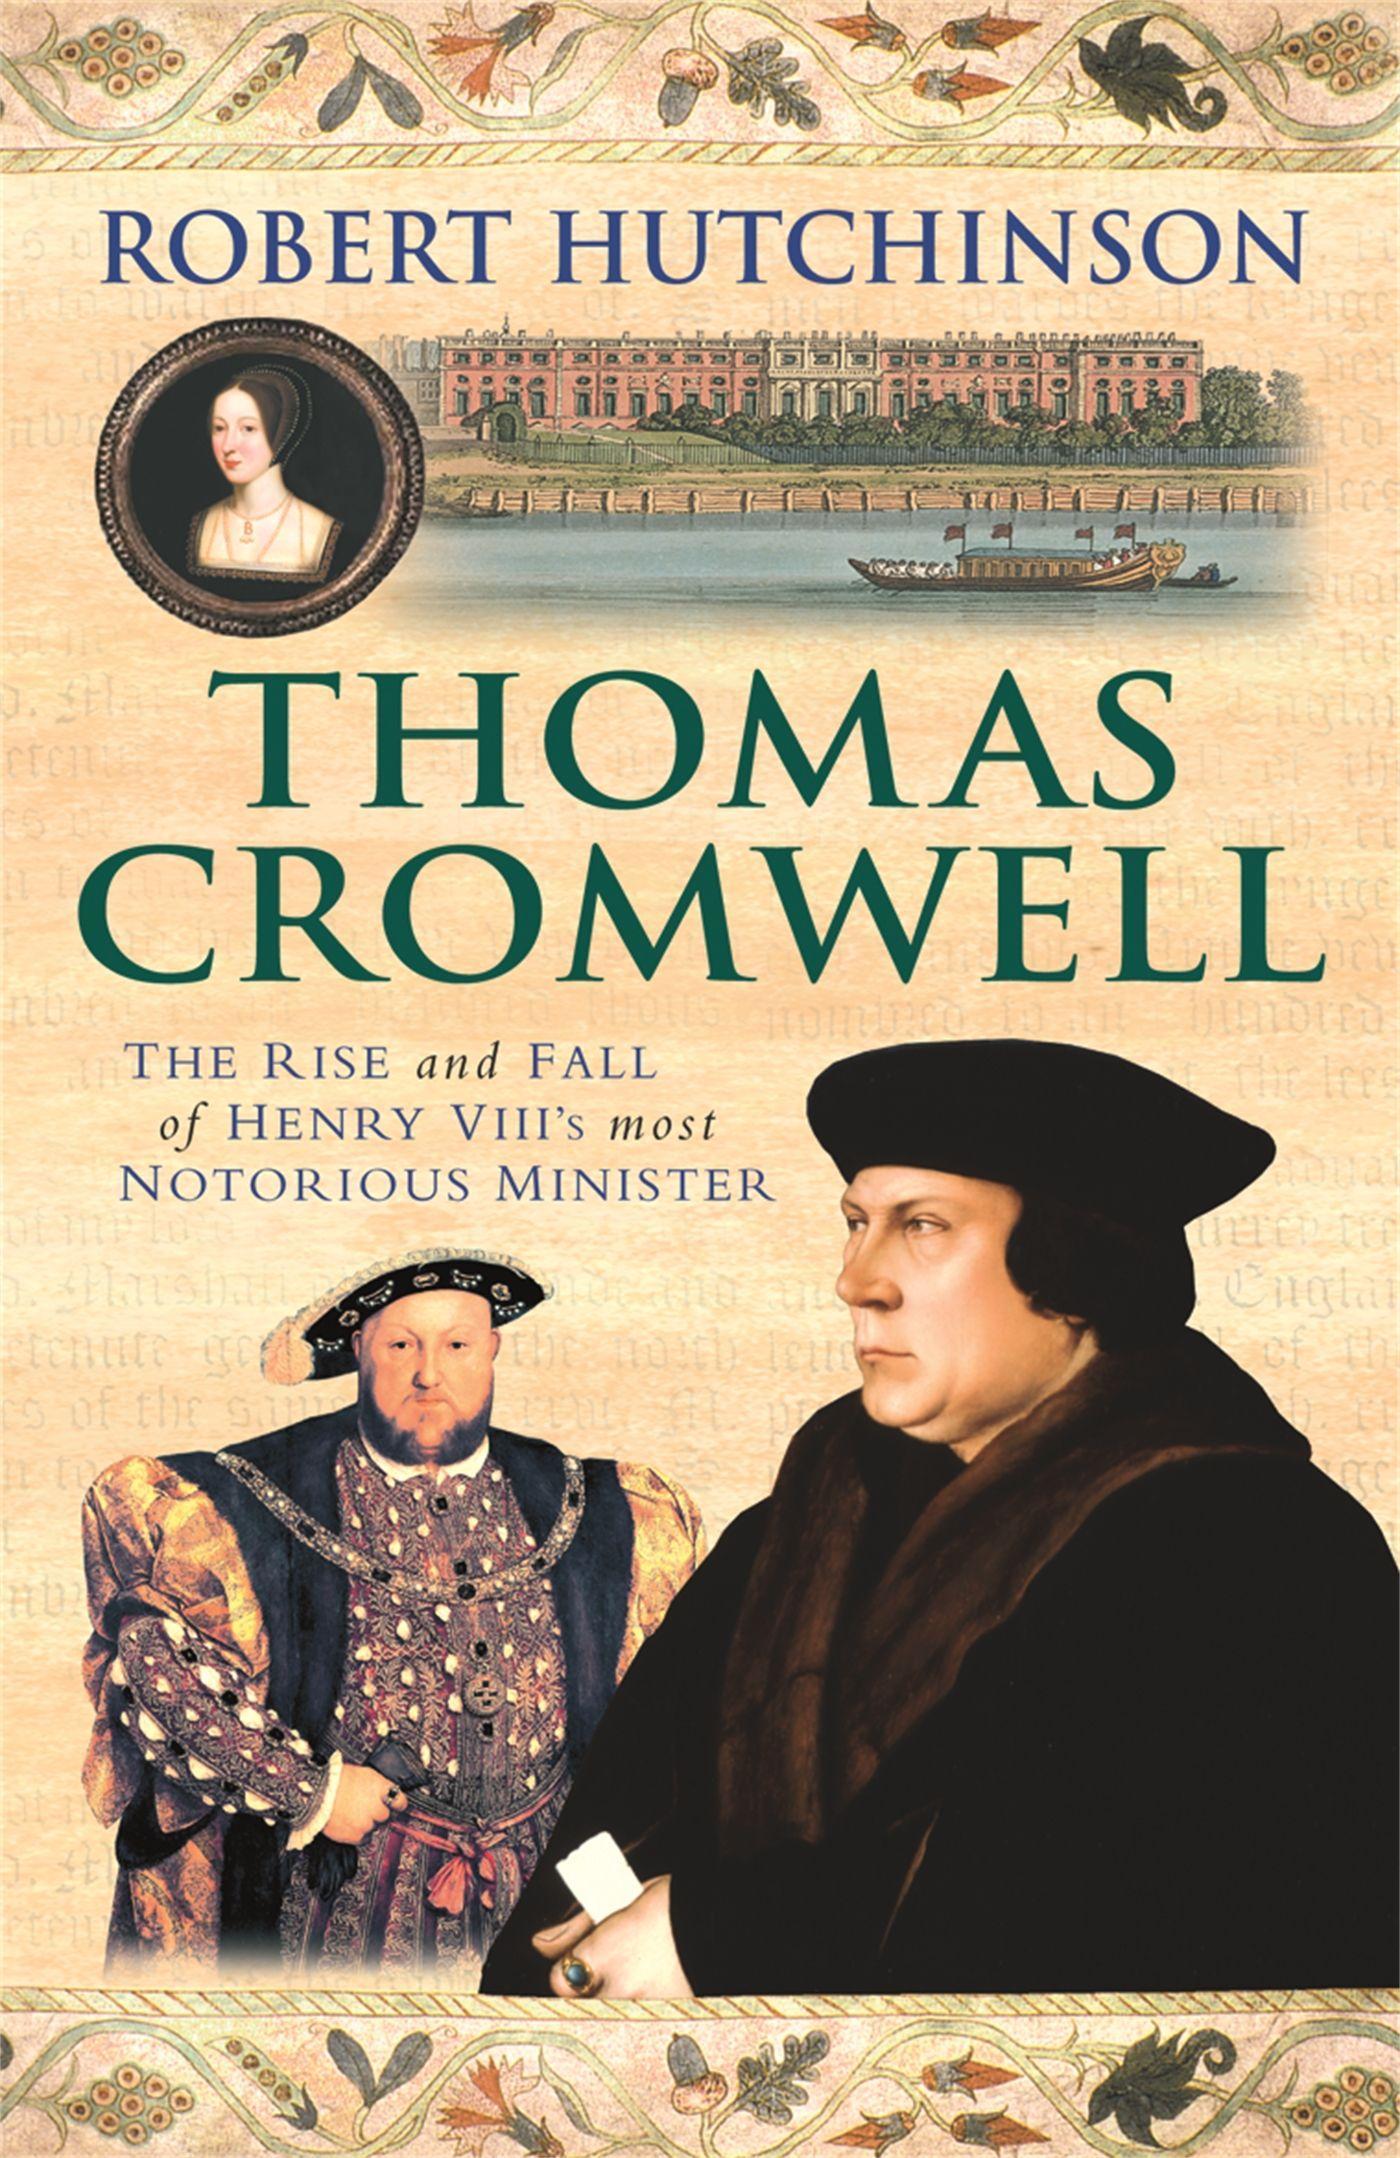 Thomas Cromwell / The Rise And Fall Of Henry VIII's Most Notorious Minister / Robert Hutchinson / Taschenbuch / Kartoniert / Broschiert / Englisch / 2009 / Orion Publishing Co / EAN 9780753823613 - Hutchinson, Robert